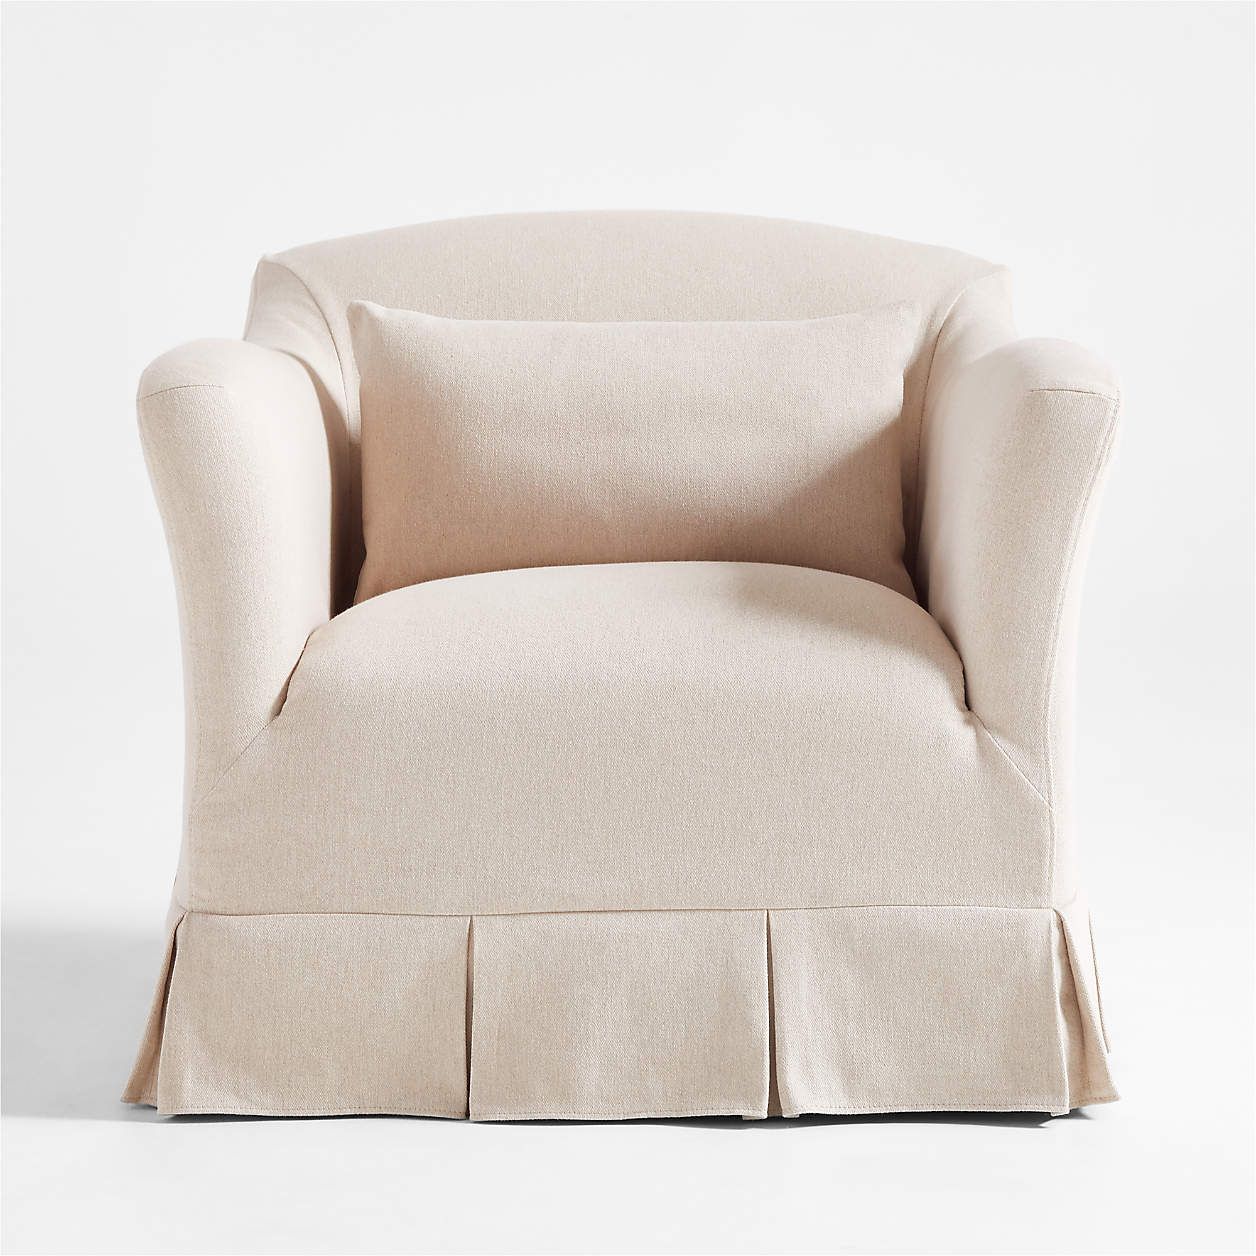 Crawford Box-Pleated Chair Slipcover Only by Jake Arnold | Crate & Barrel | Crate & Barrel